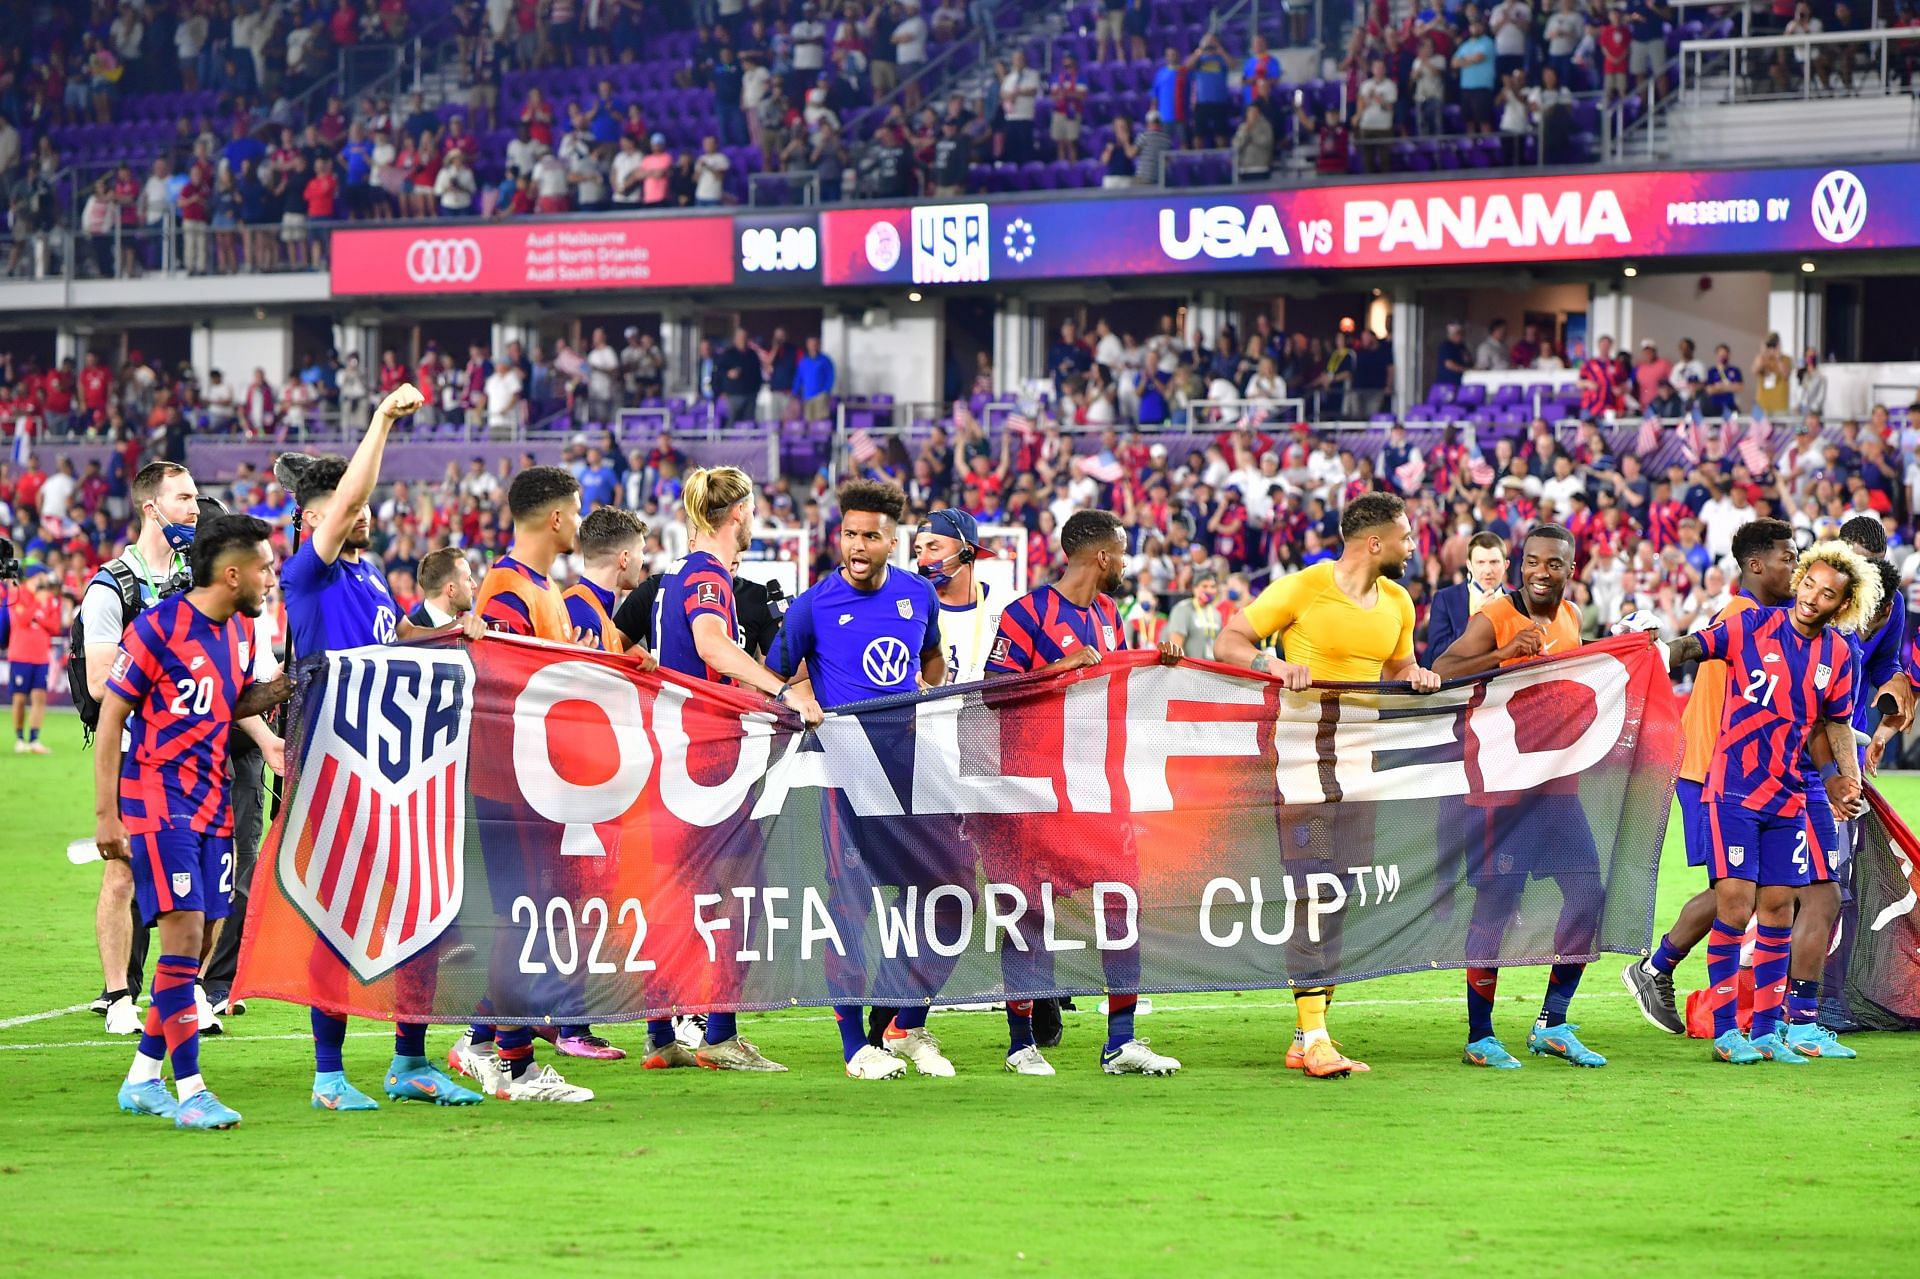 USA qualified for FIFA World Cup 2022